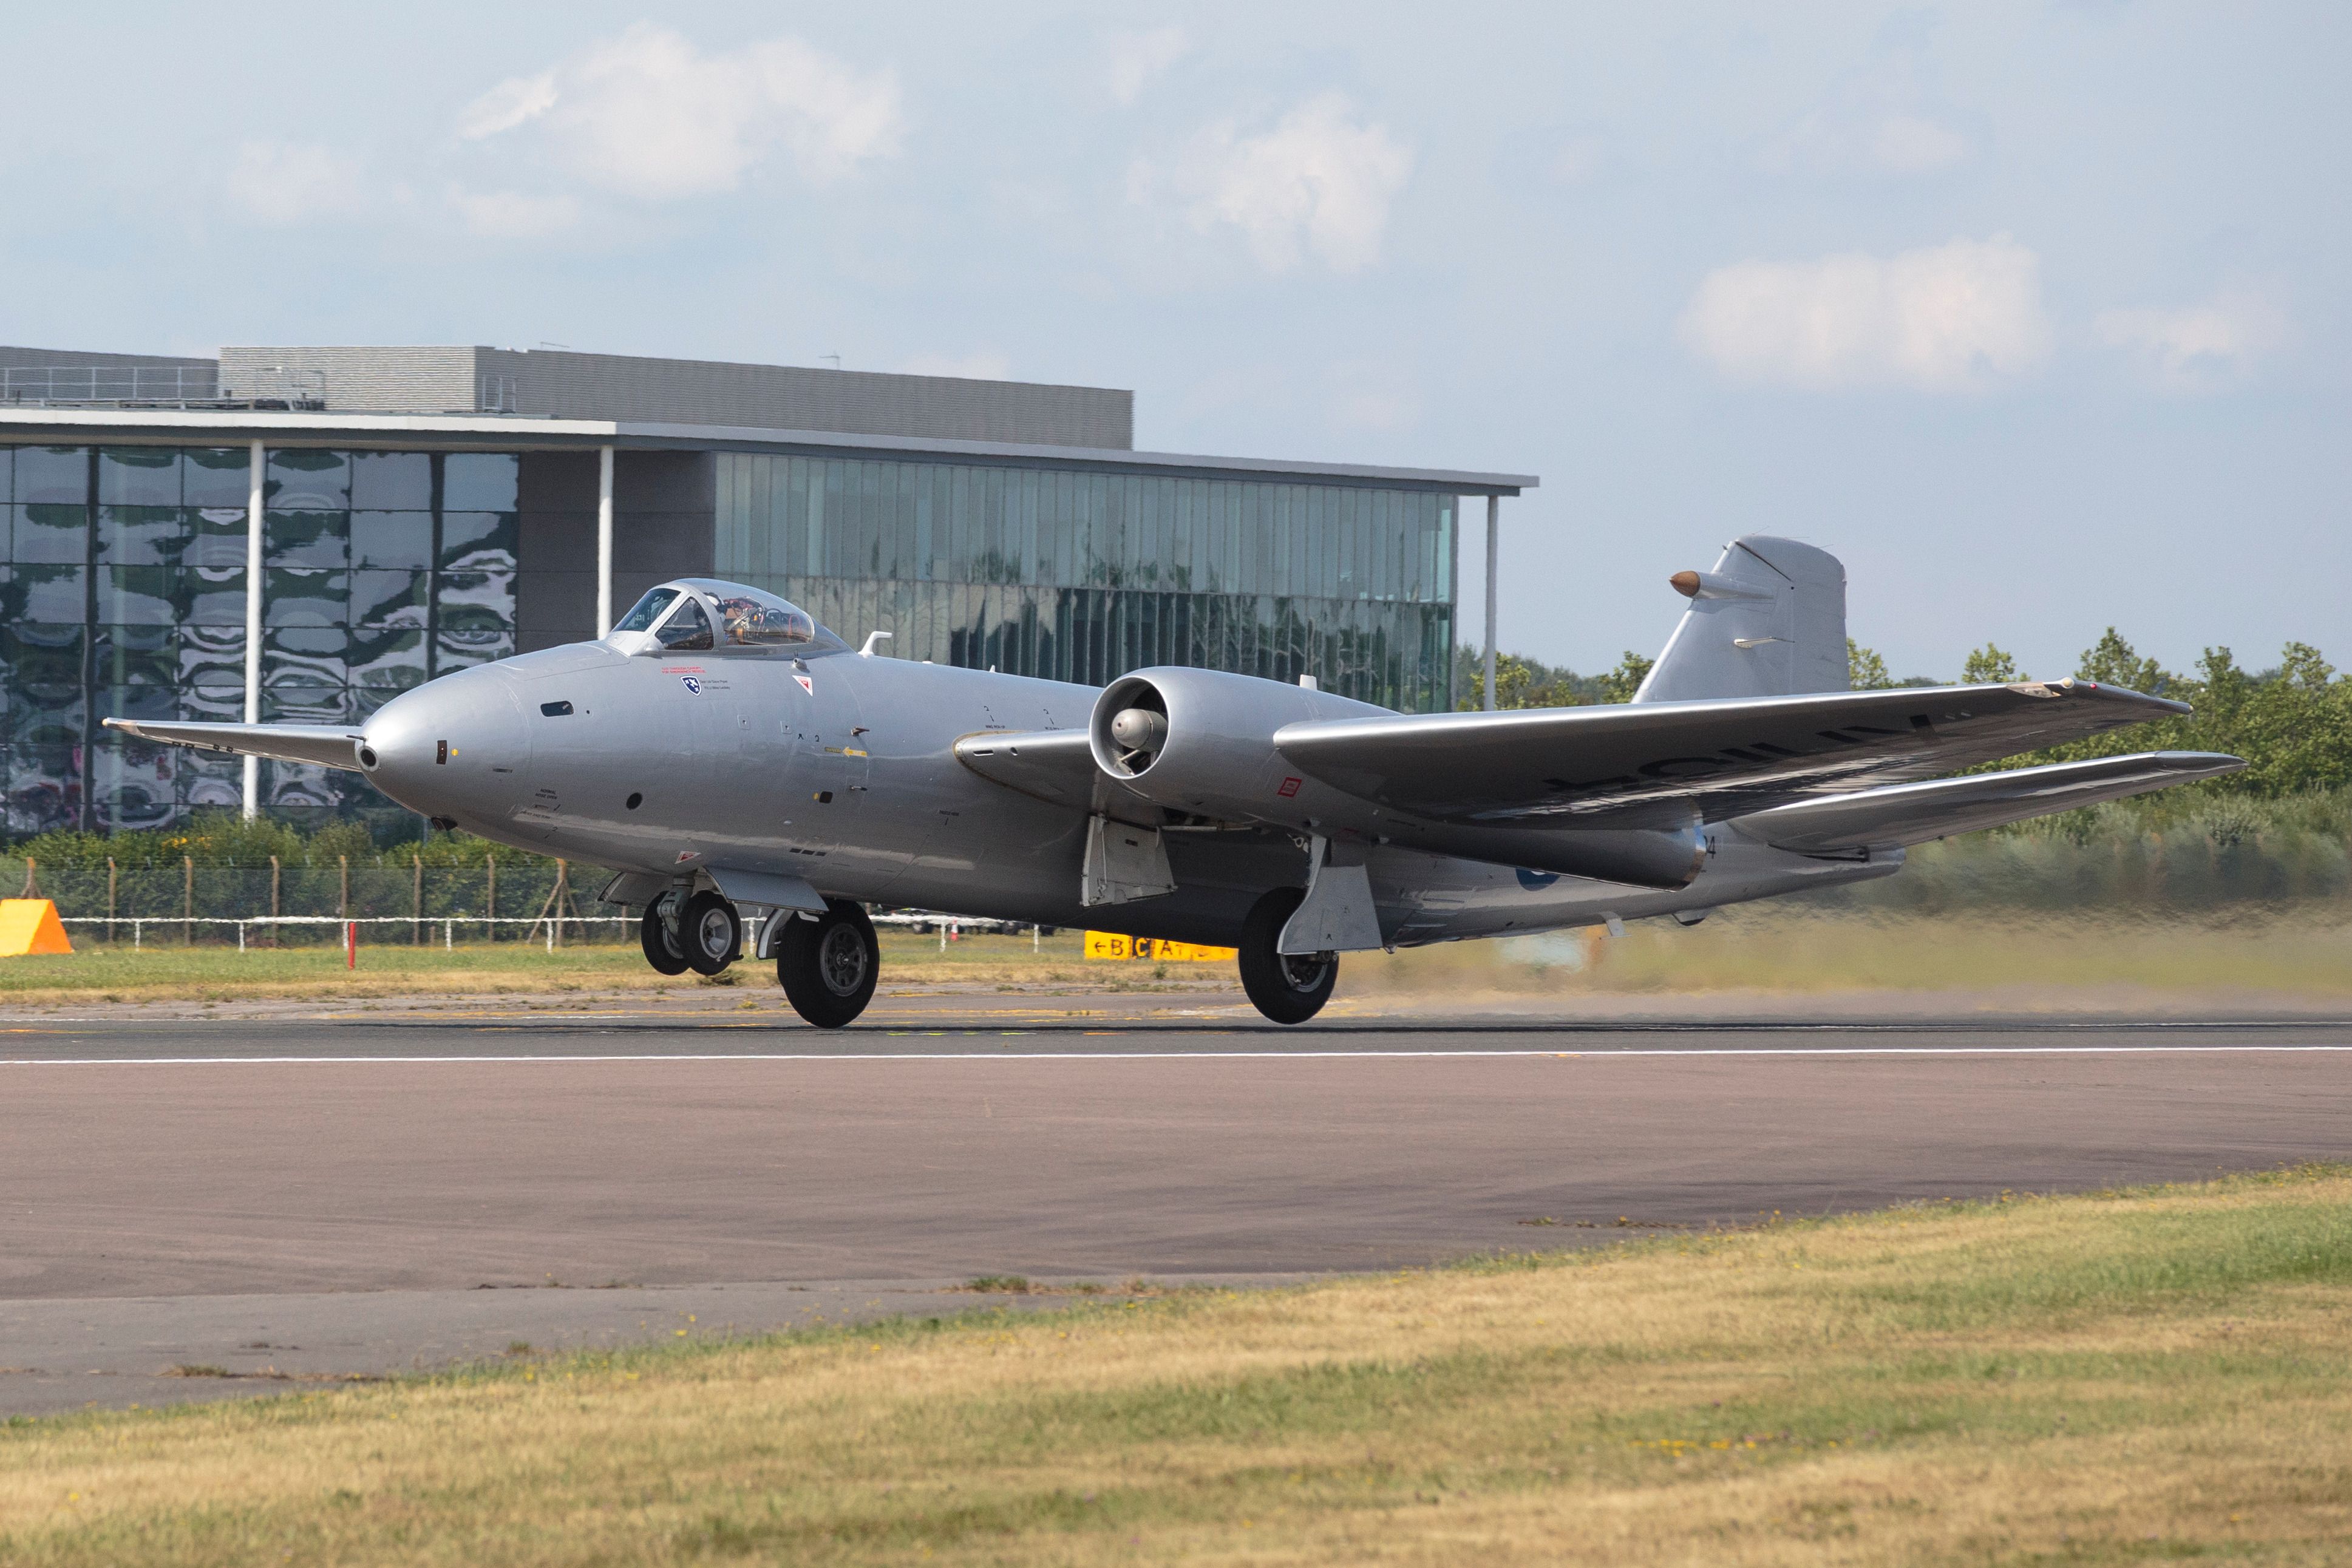 An English Electric Canberra PR.9 about to take off.